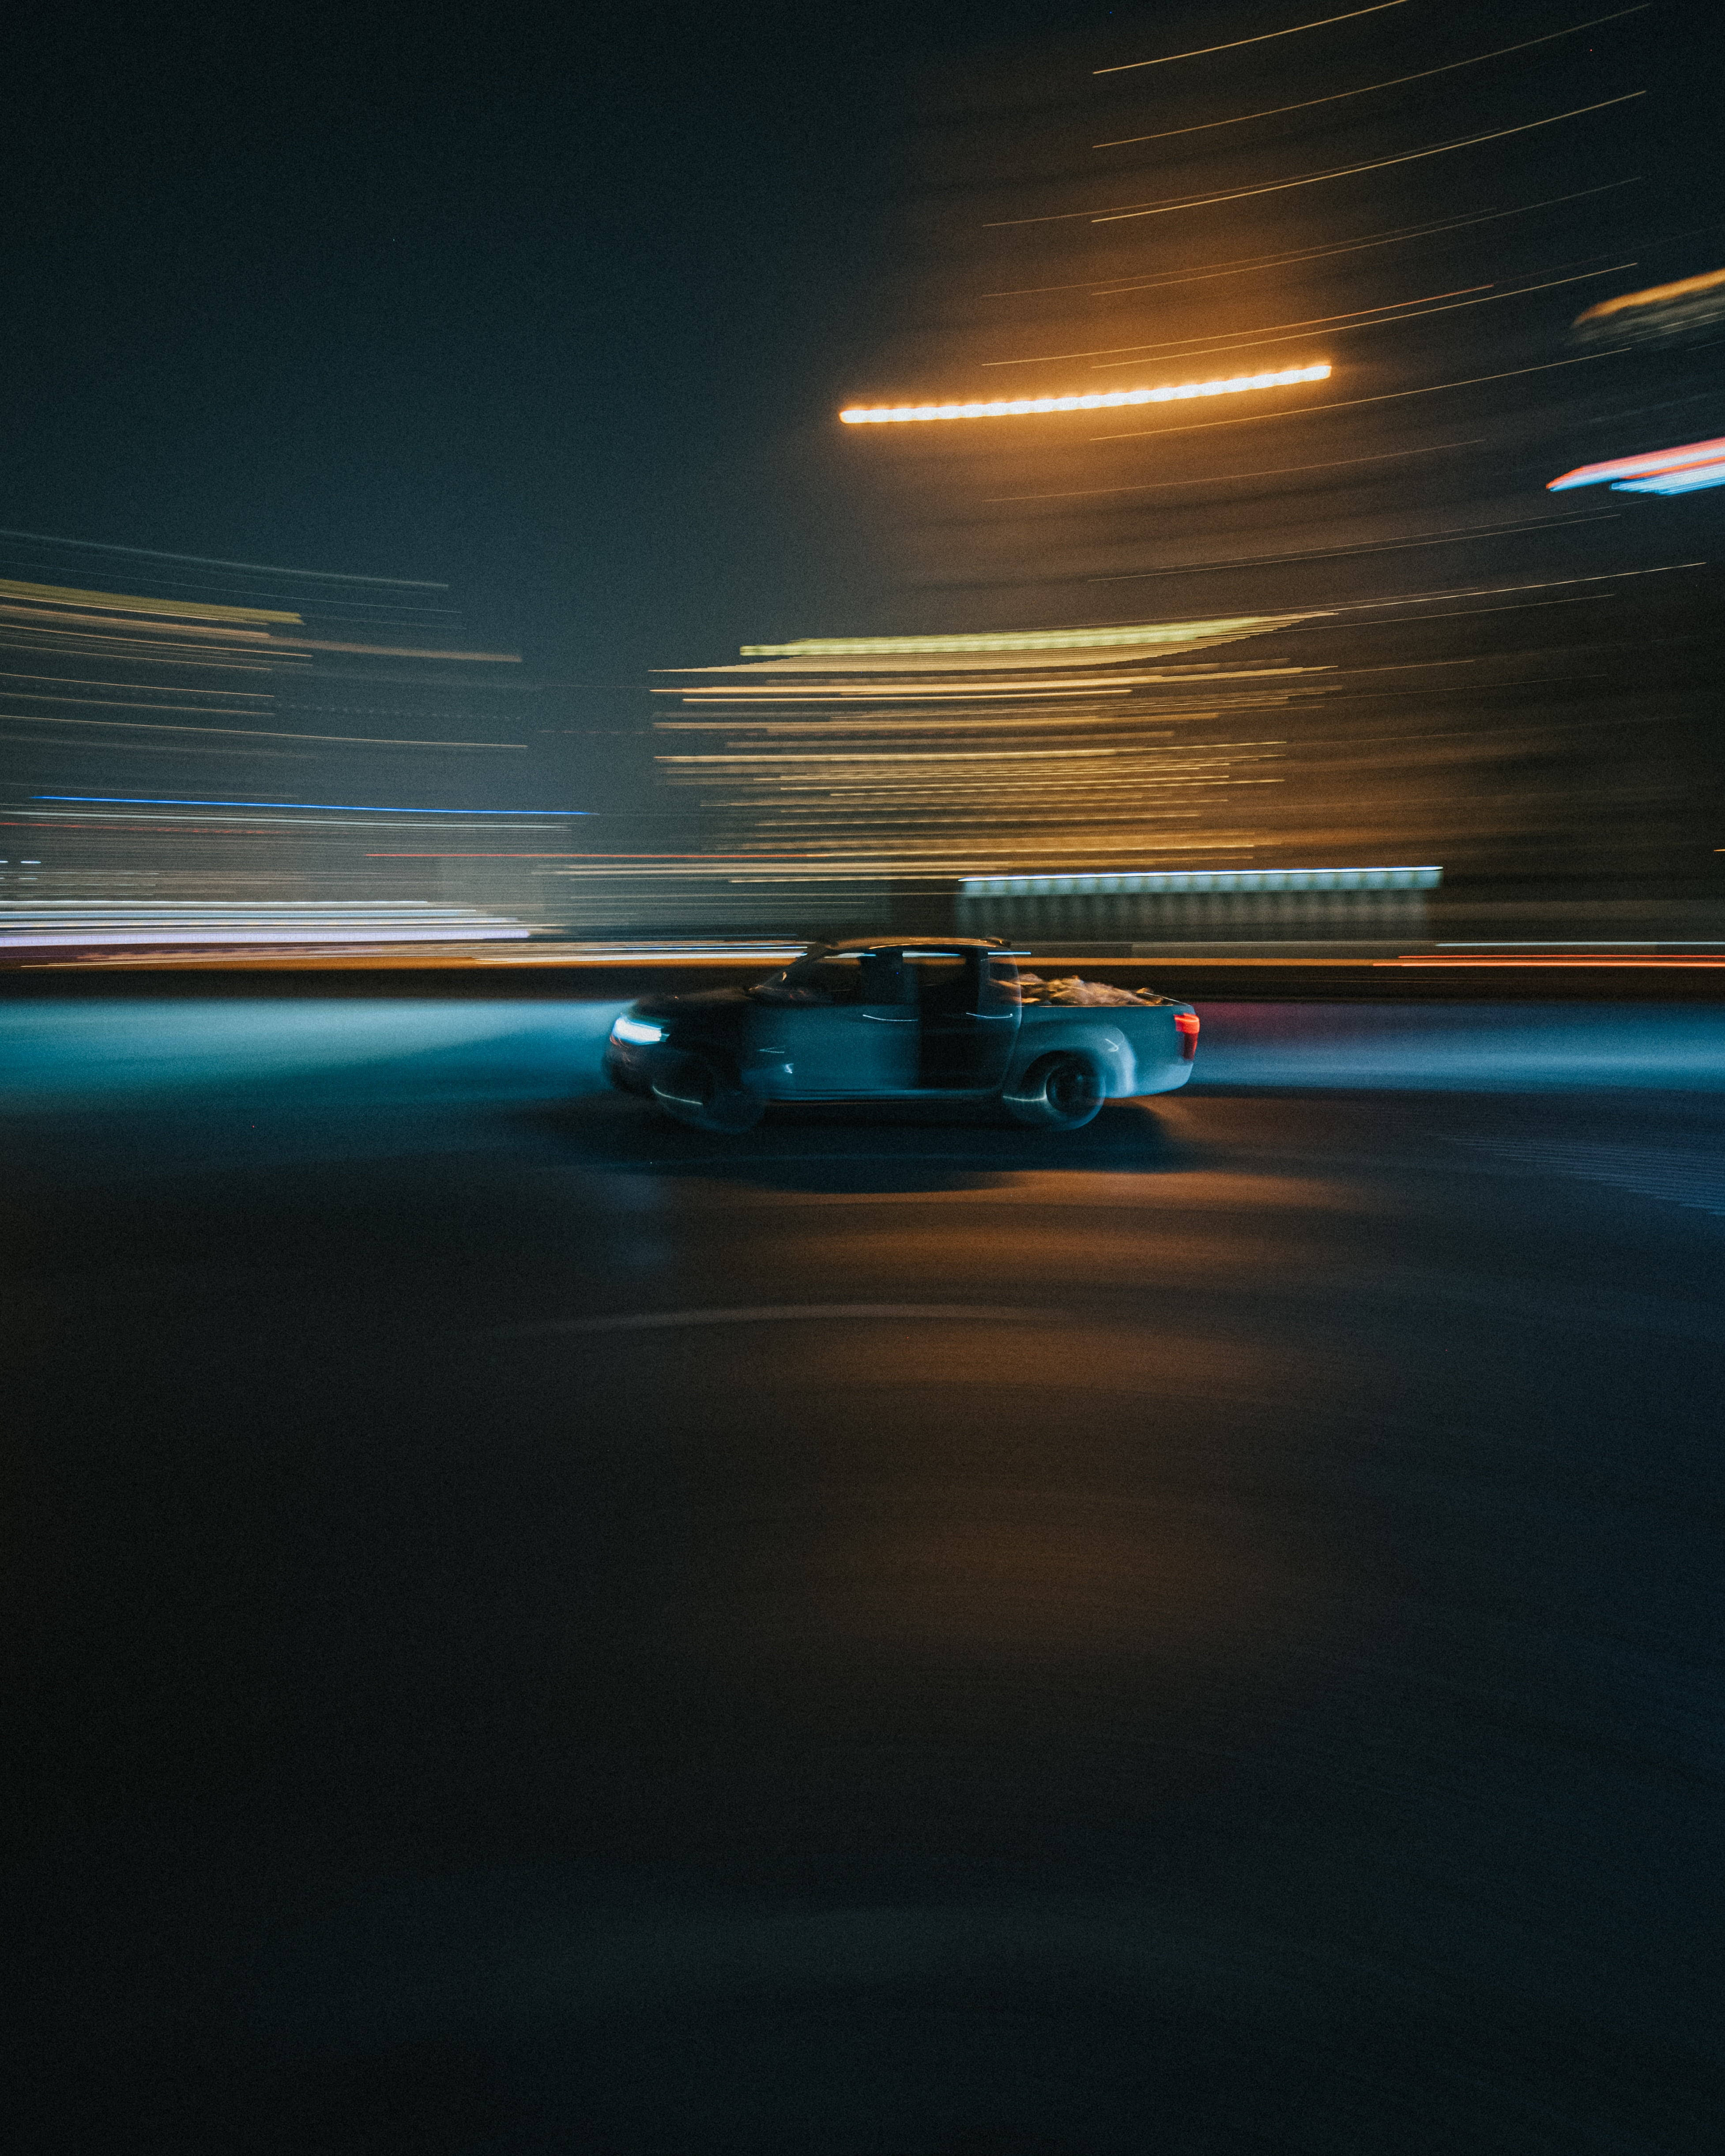 Blurry Aesthetic Car In Speed iPhone Wallpaper